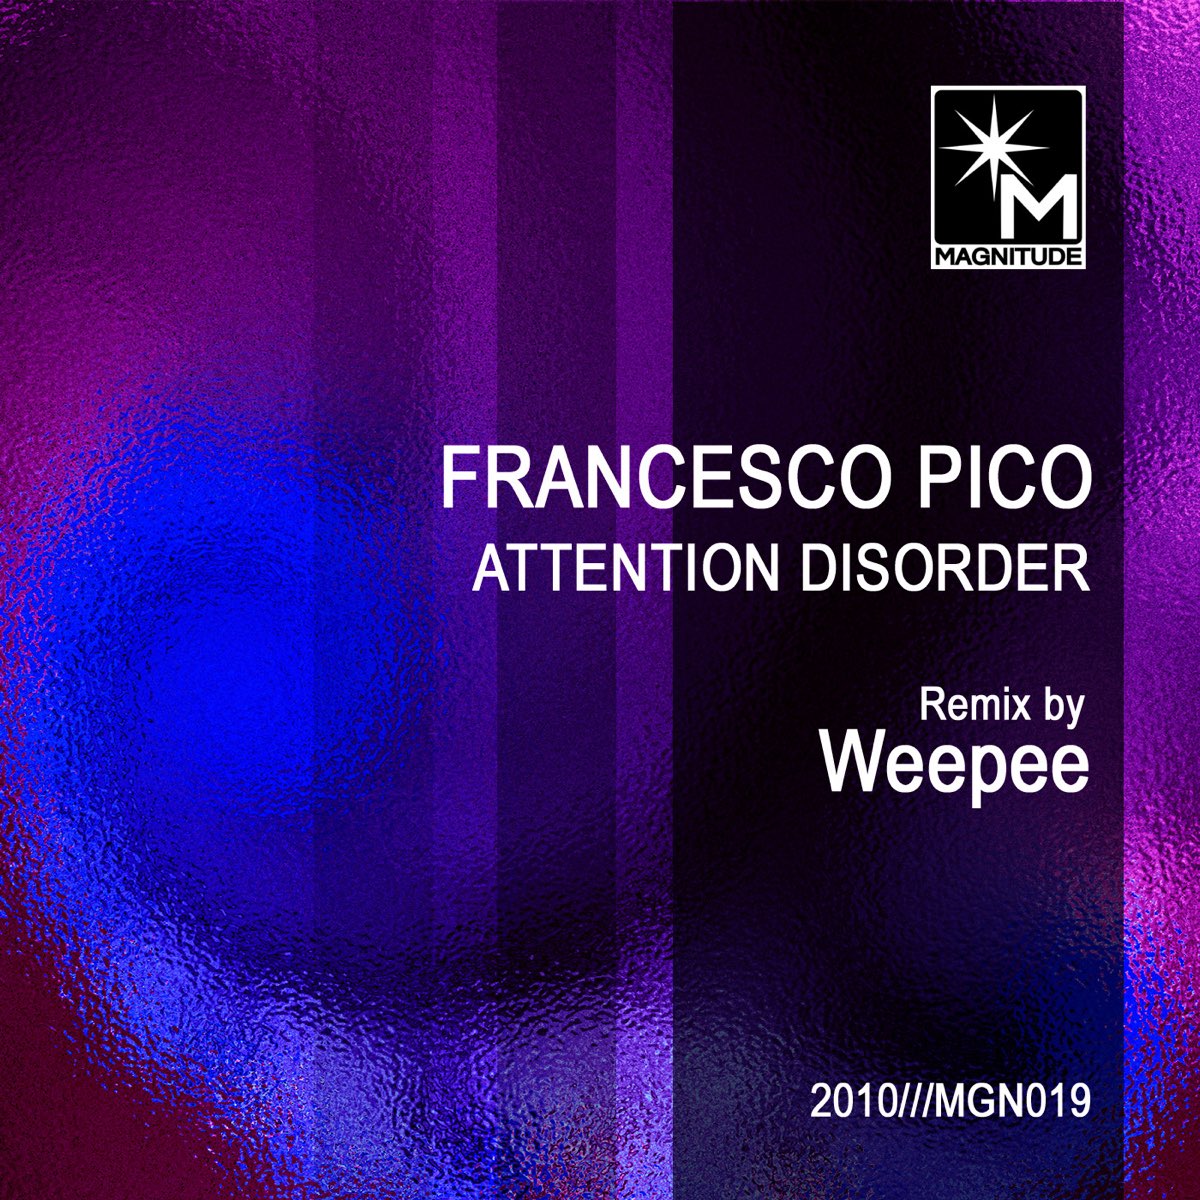 Attention disorders. Francesco Pico. Disorder "Singles collection".